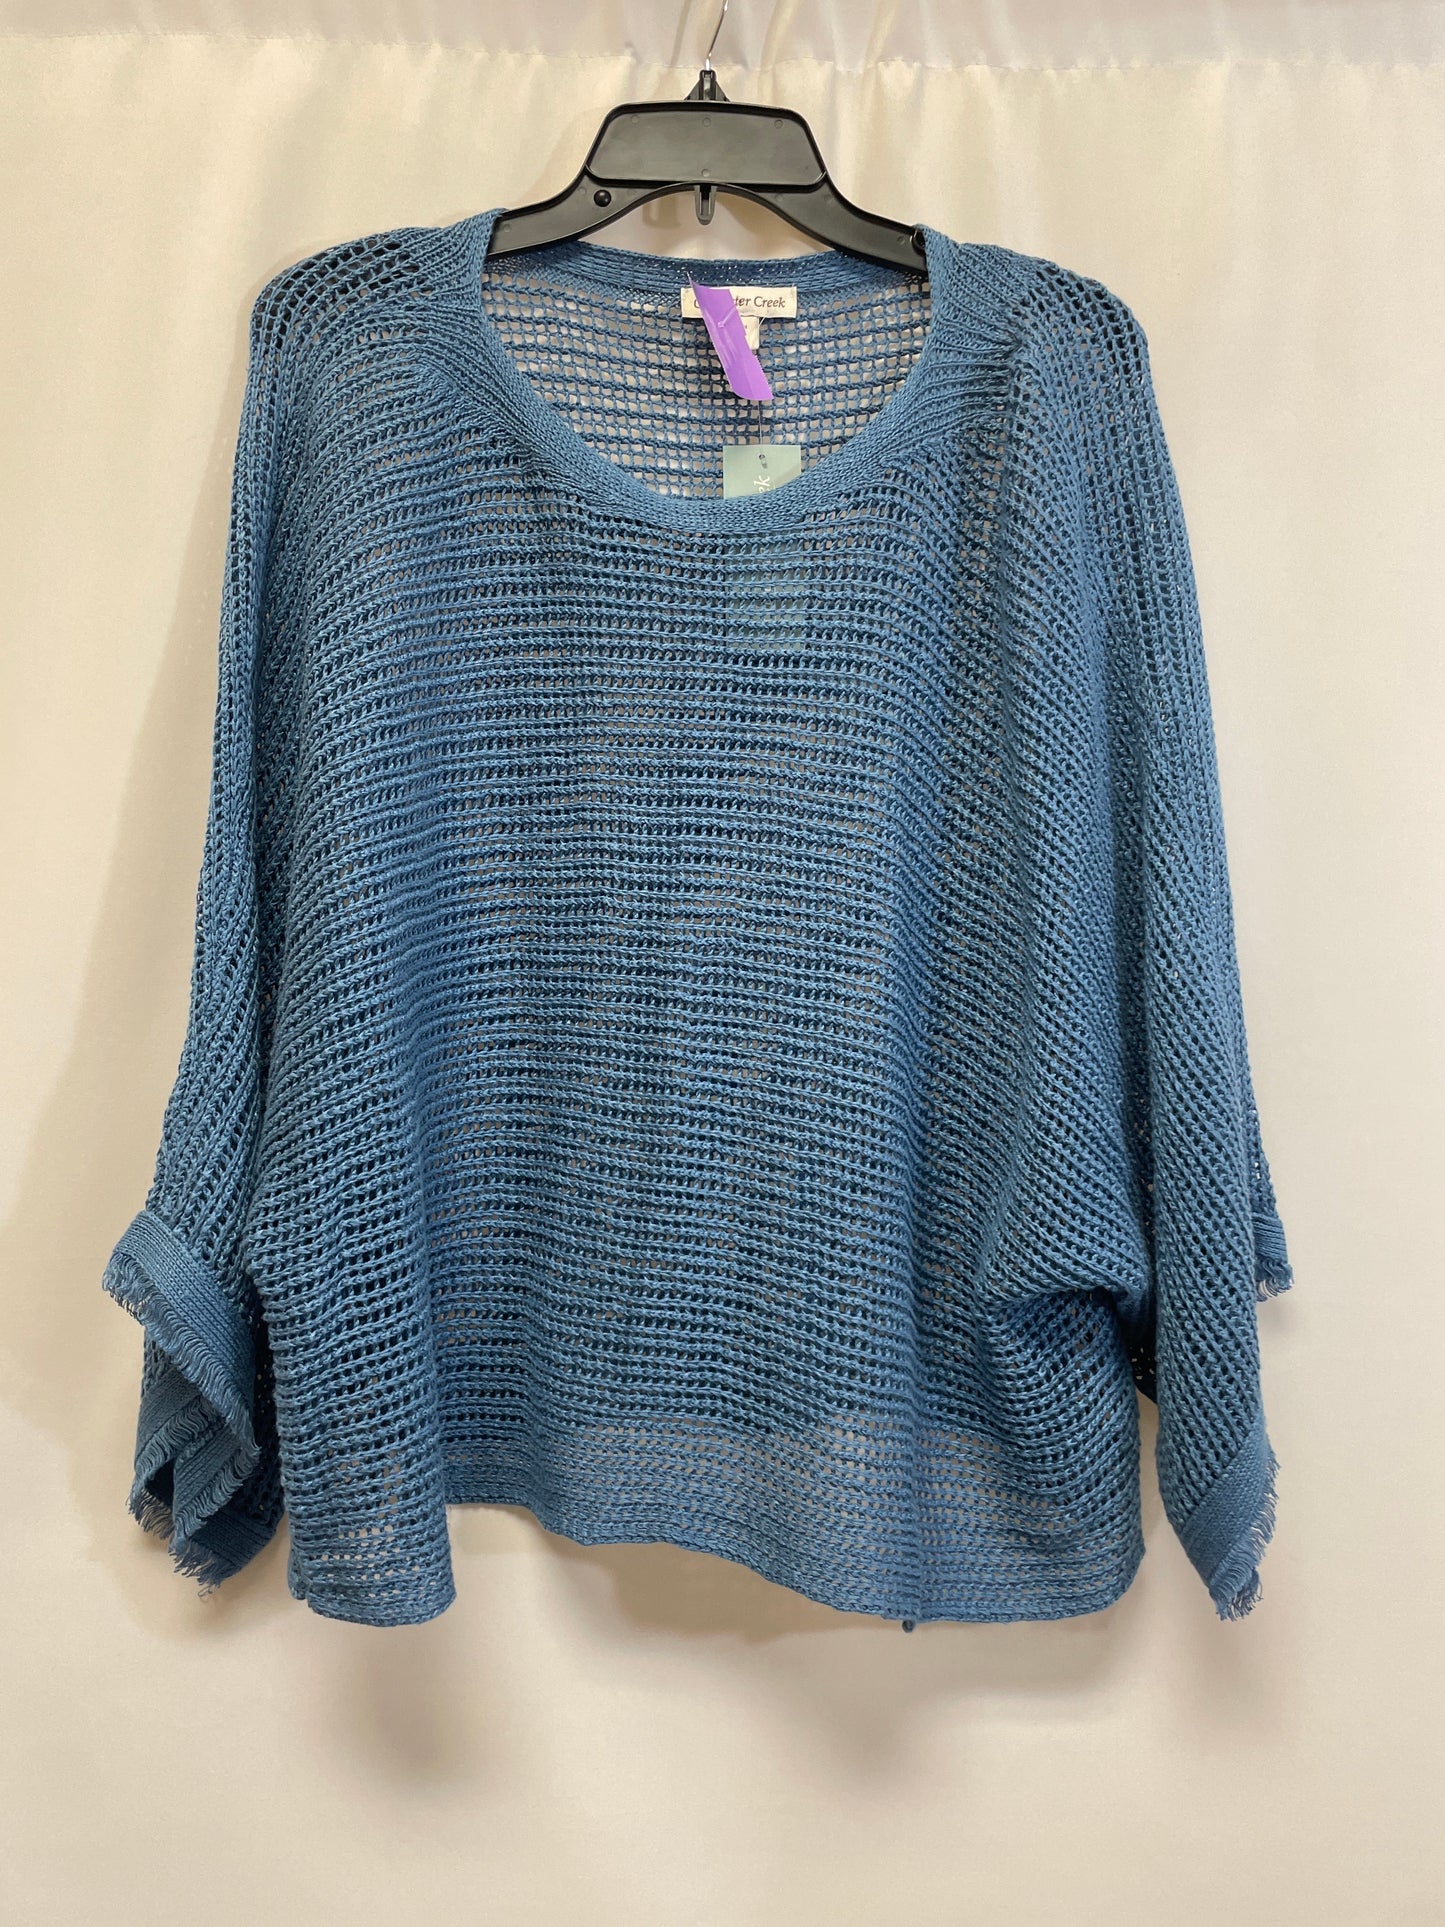 Blue Top 3/4 Sleeve Coldwater Creek, Size Xl